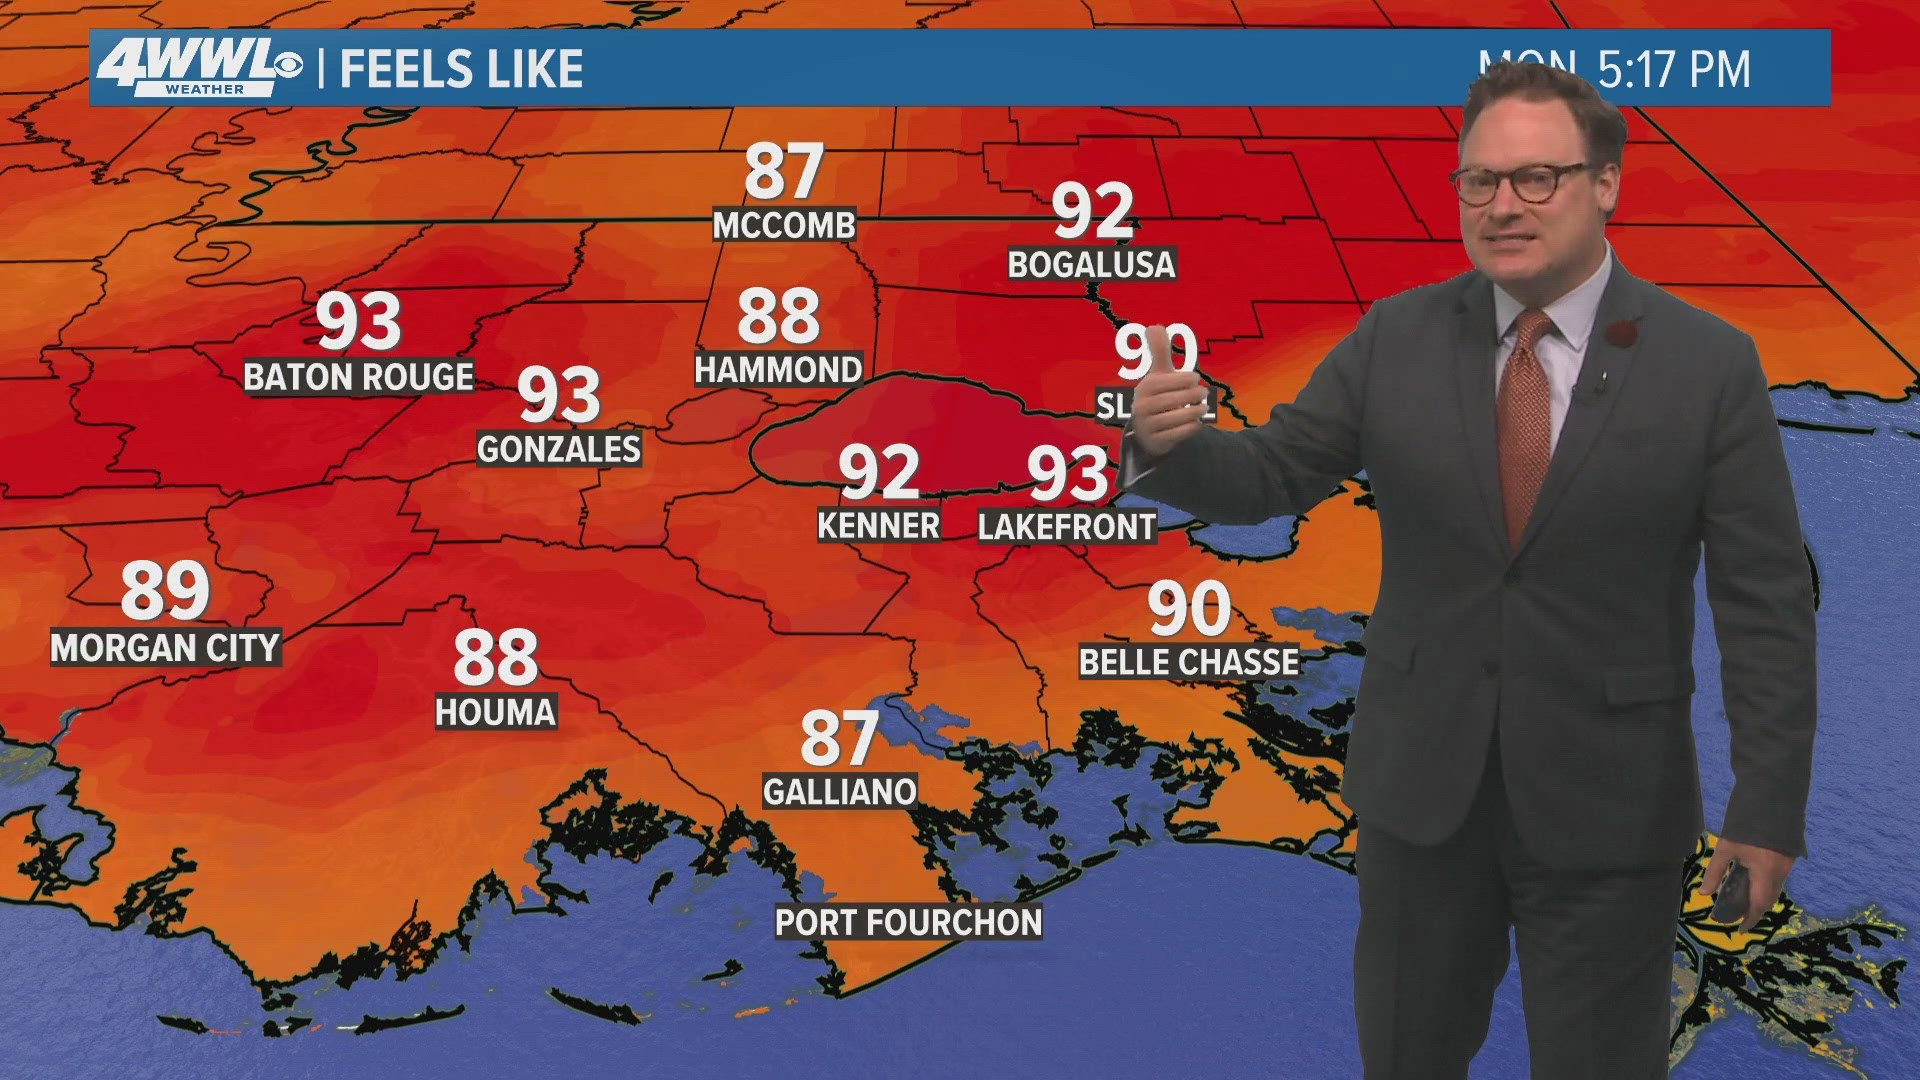 WWL Louisiana Chief Meteorologist Chris Franklin gives a Monday afternoon weather update.